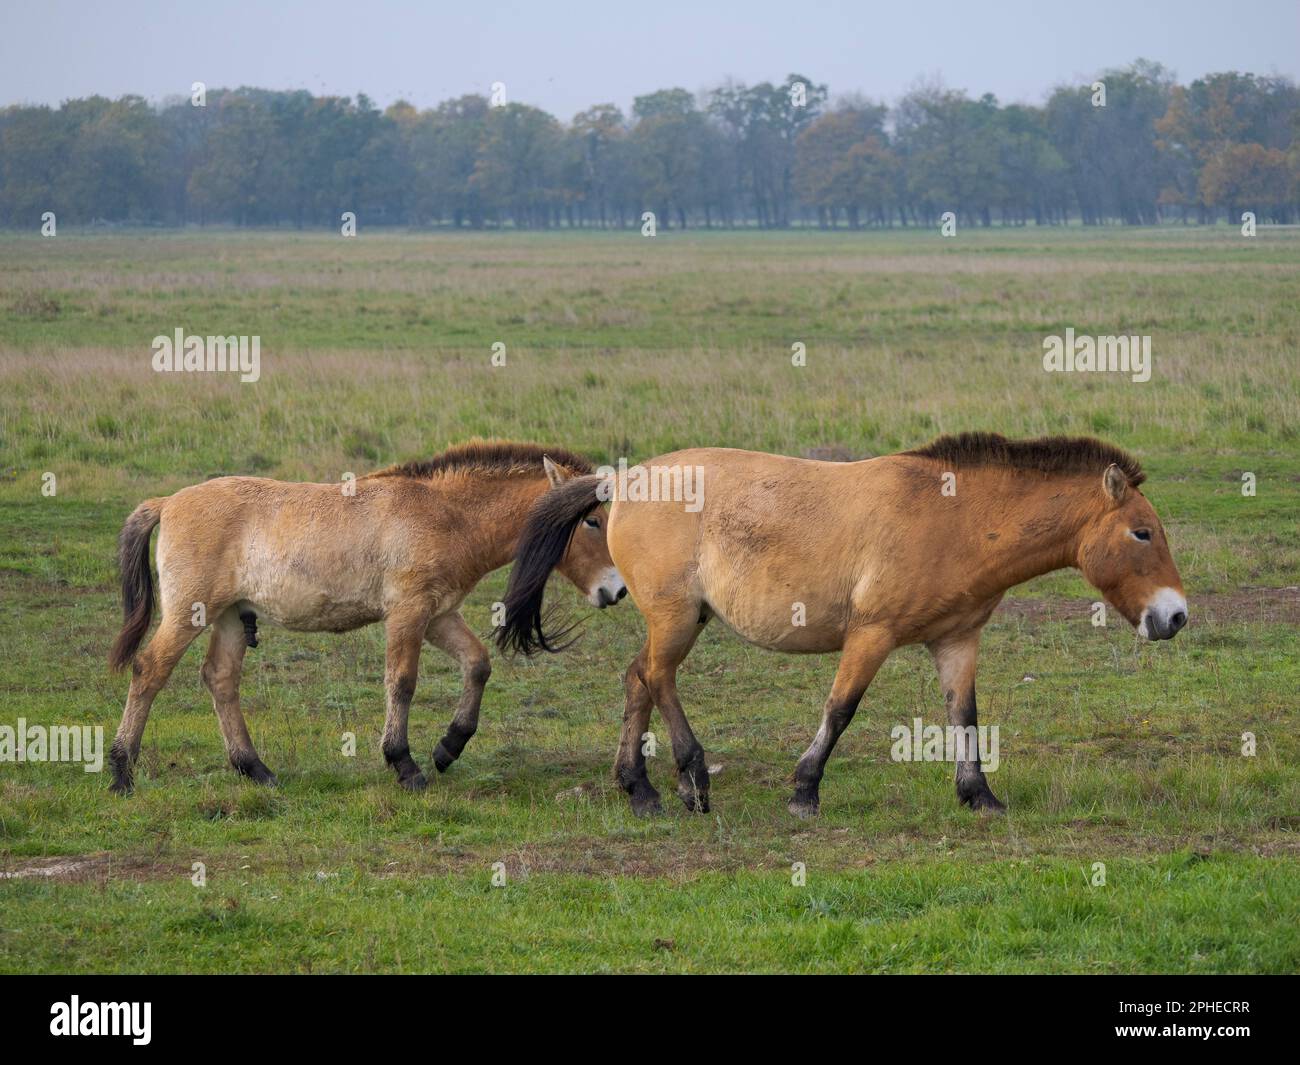 Przewalskis Horse or Takhi (Equus ferus przewalskii) on a free range area in the Hortobagy National Park, which is listed as UNESCO world heritage sit Stock Photo